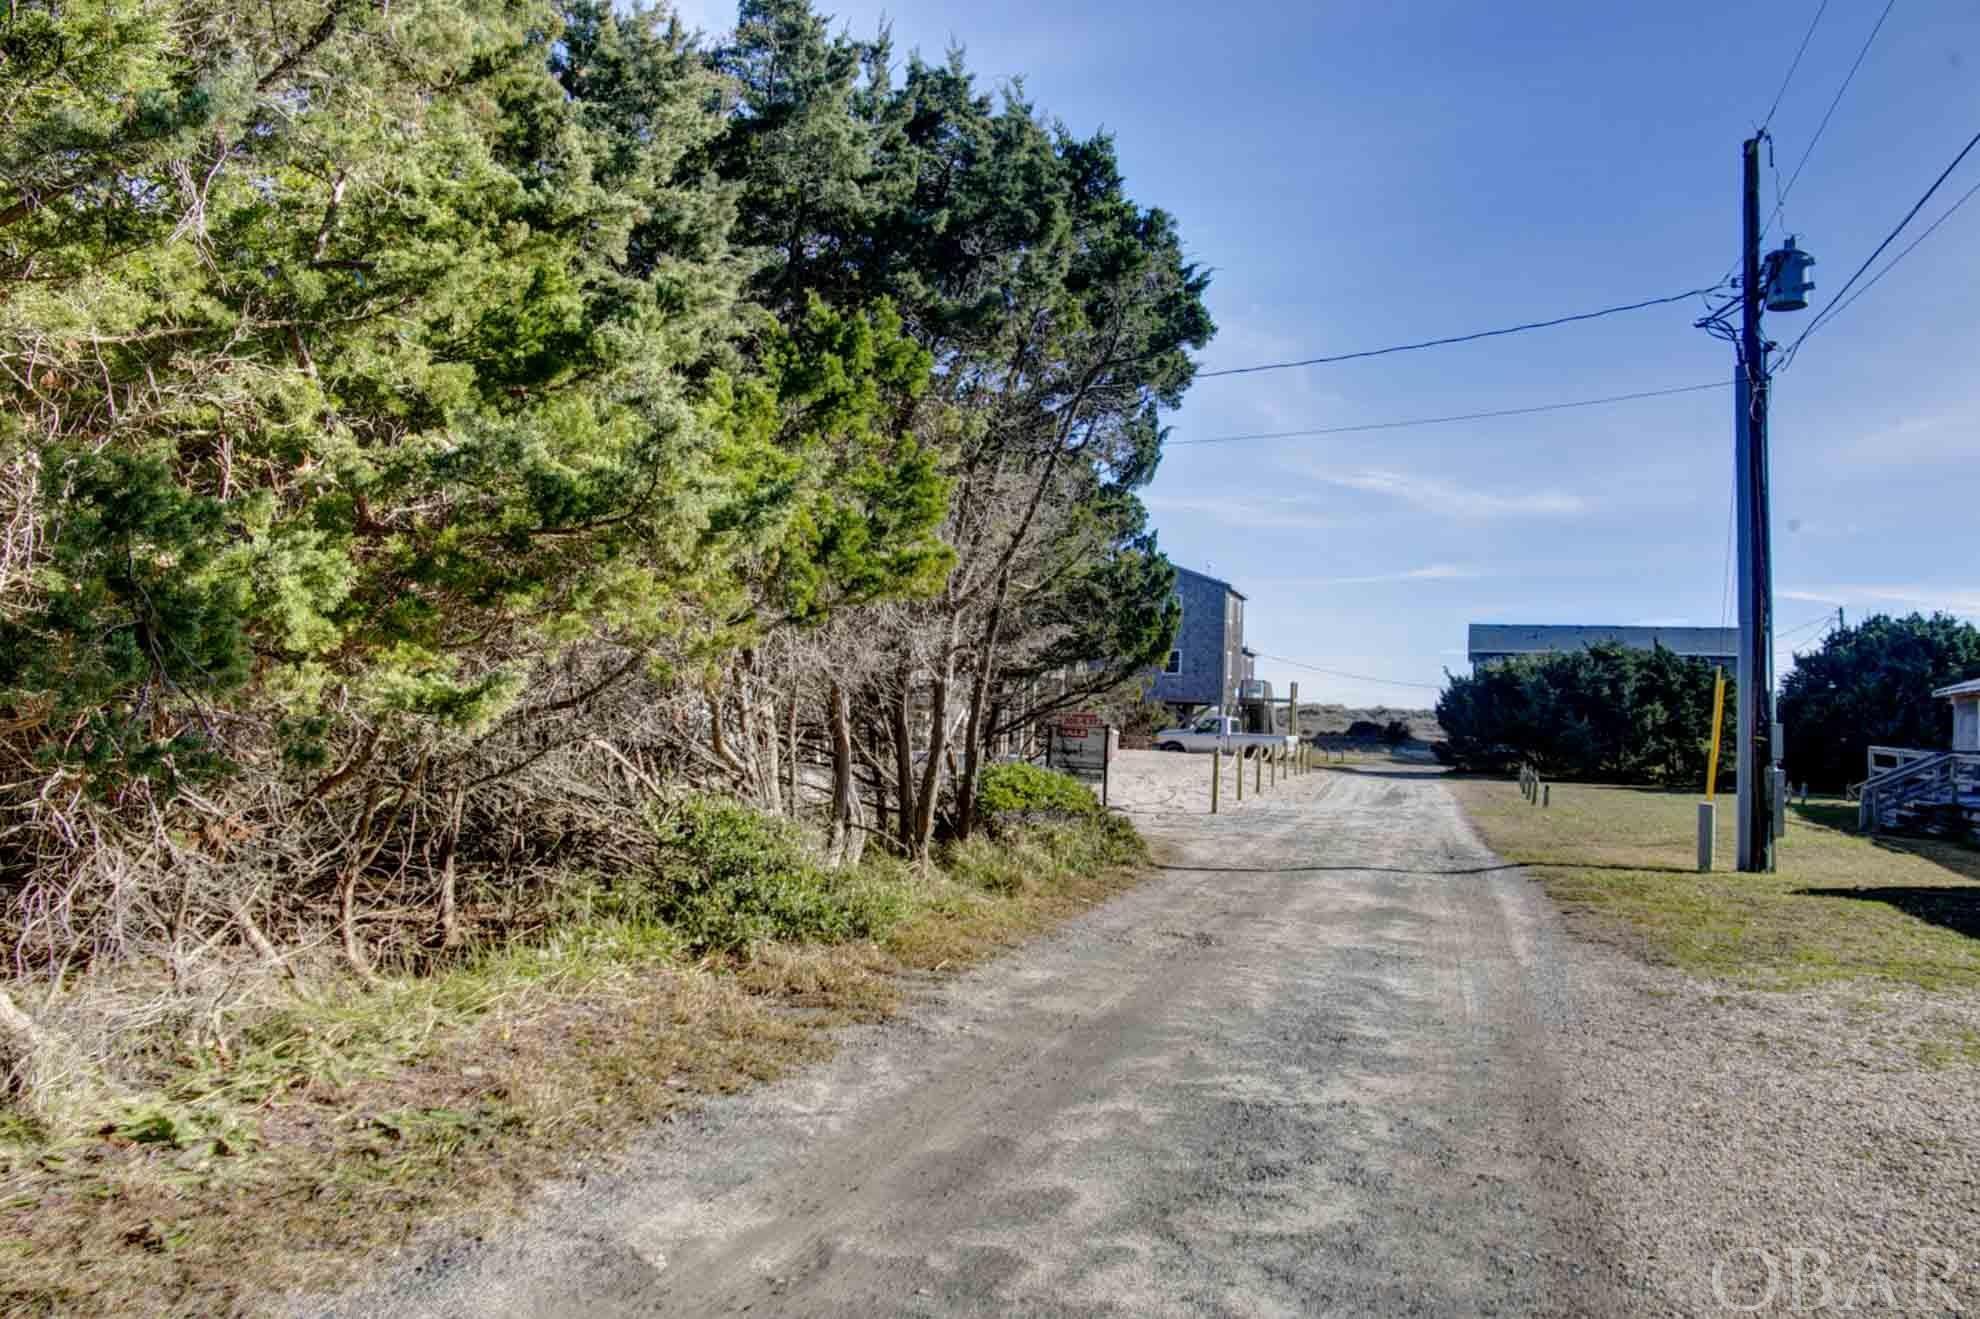 58215 Smell Wreck Lane, Hatteras, NC 27943, ,Lots/land,For sale,Smell Wreck Lane,124257